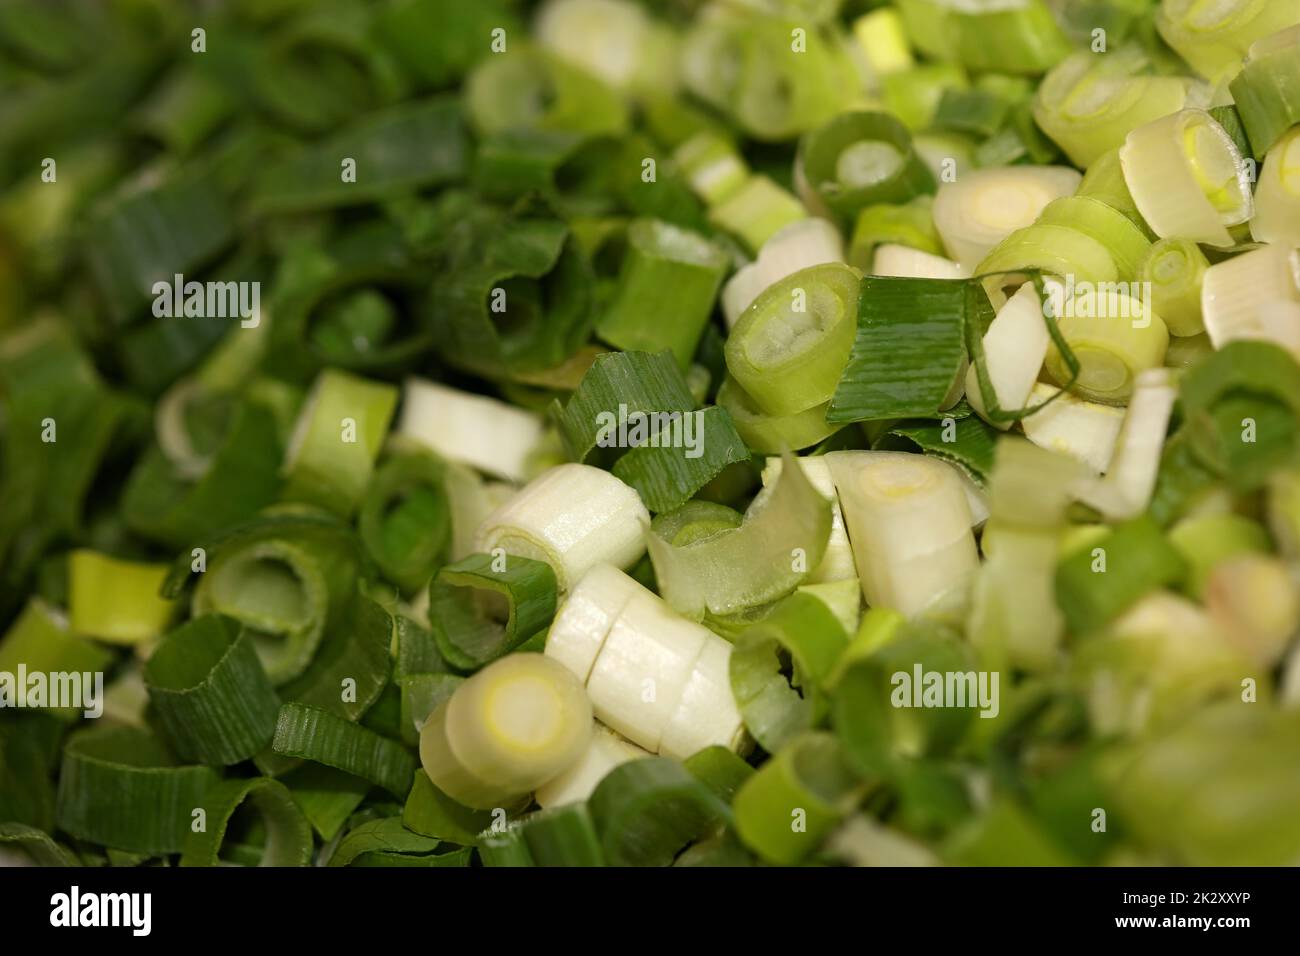 Chopped scallions green onion catering macro background modern high quality prints Stock Photo